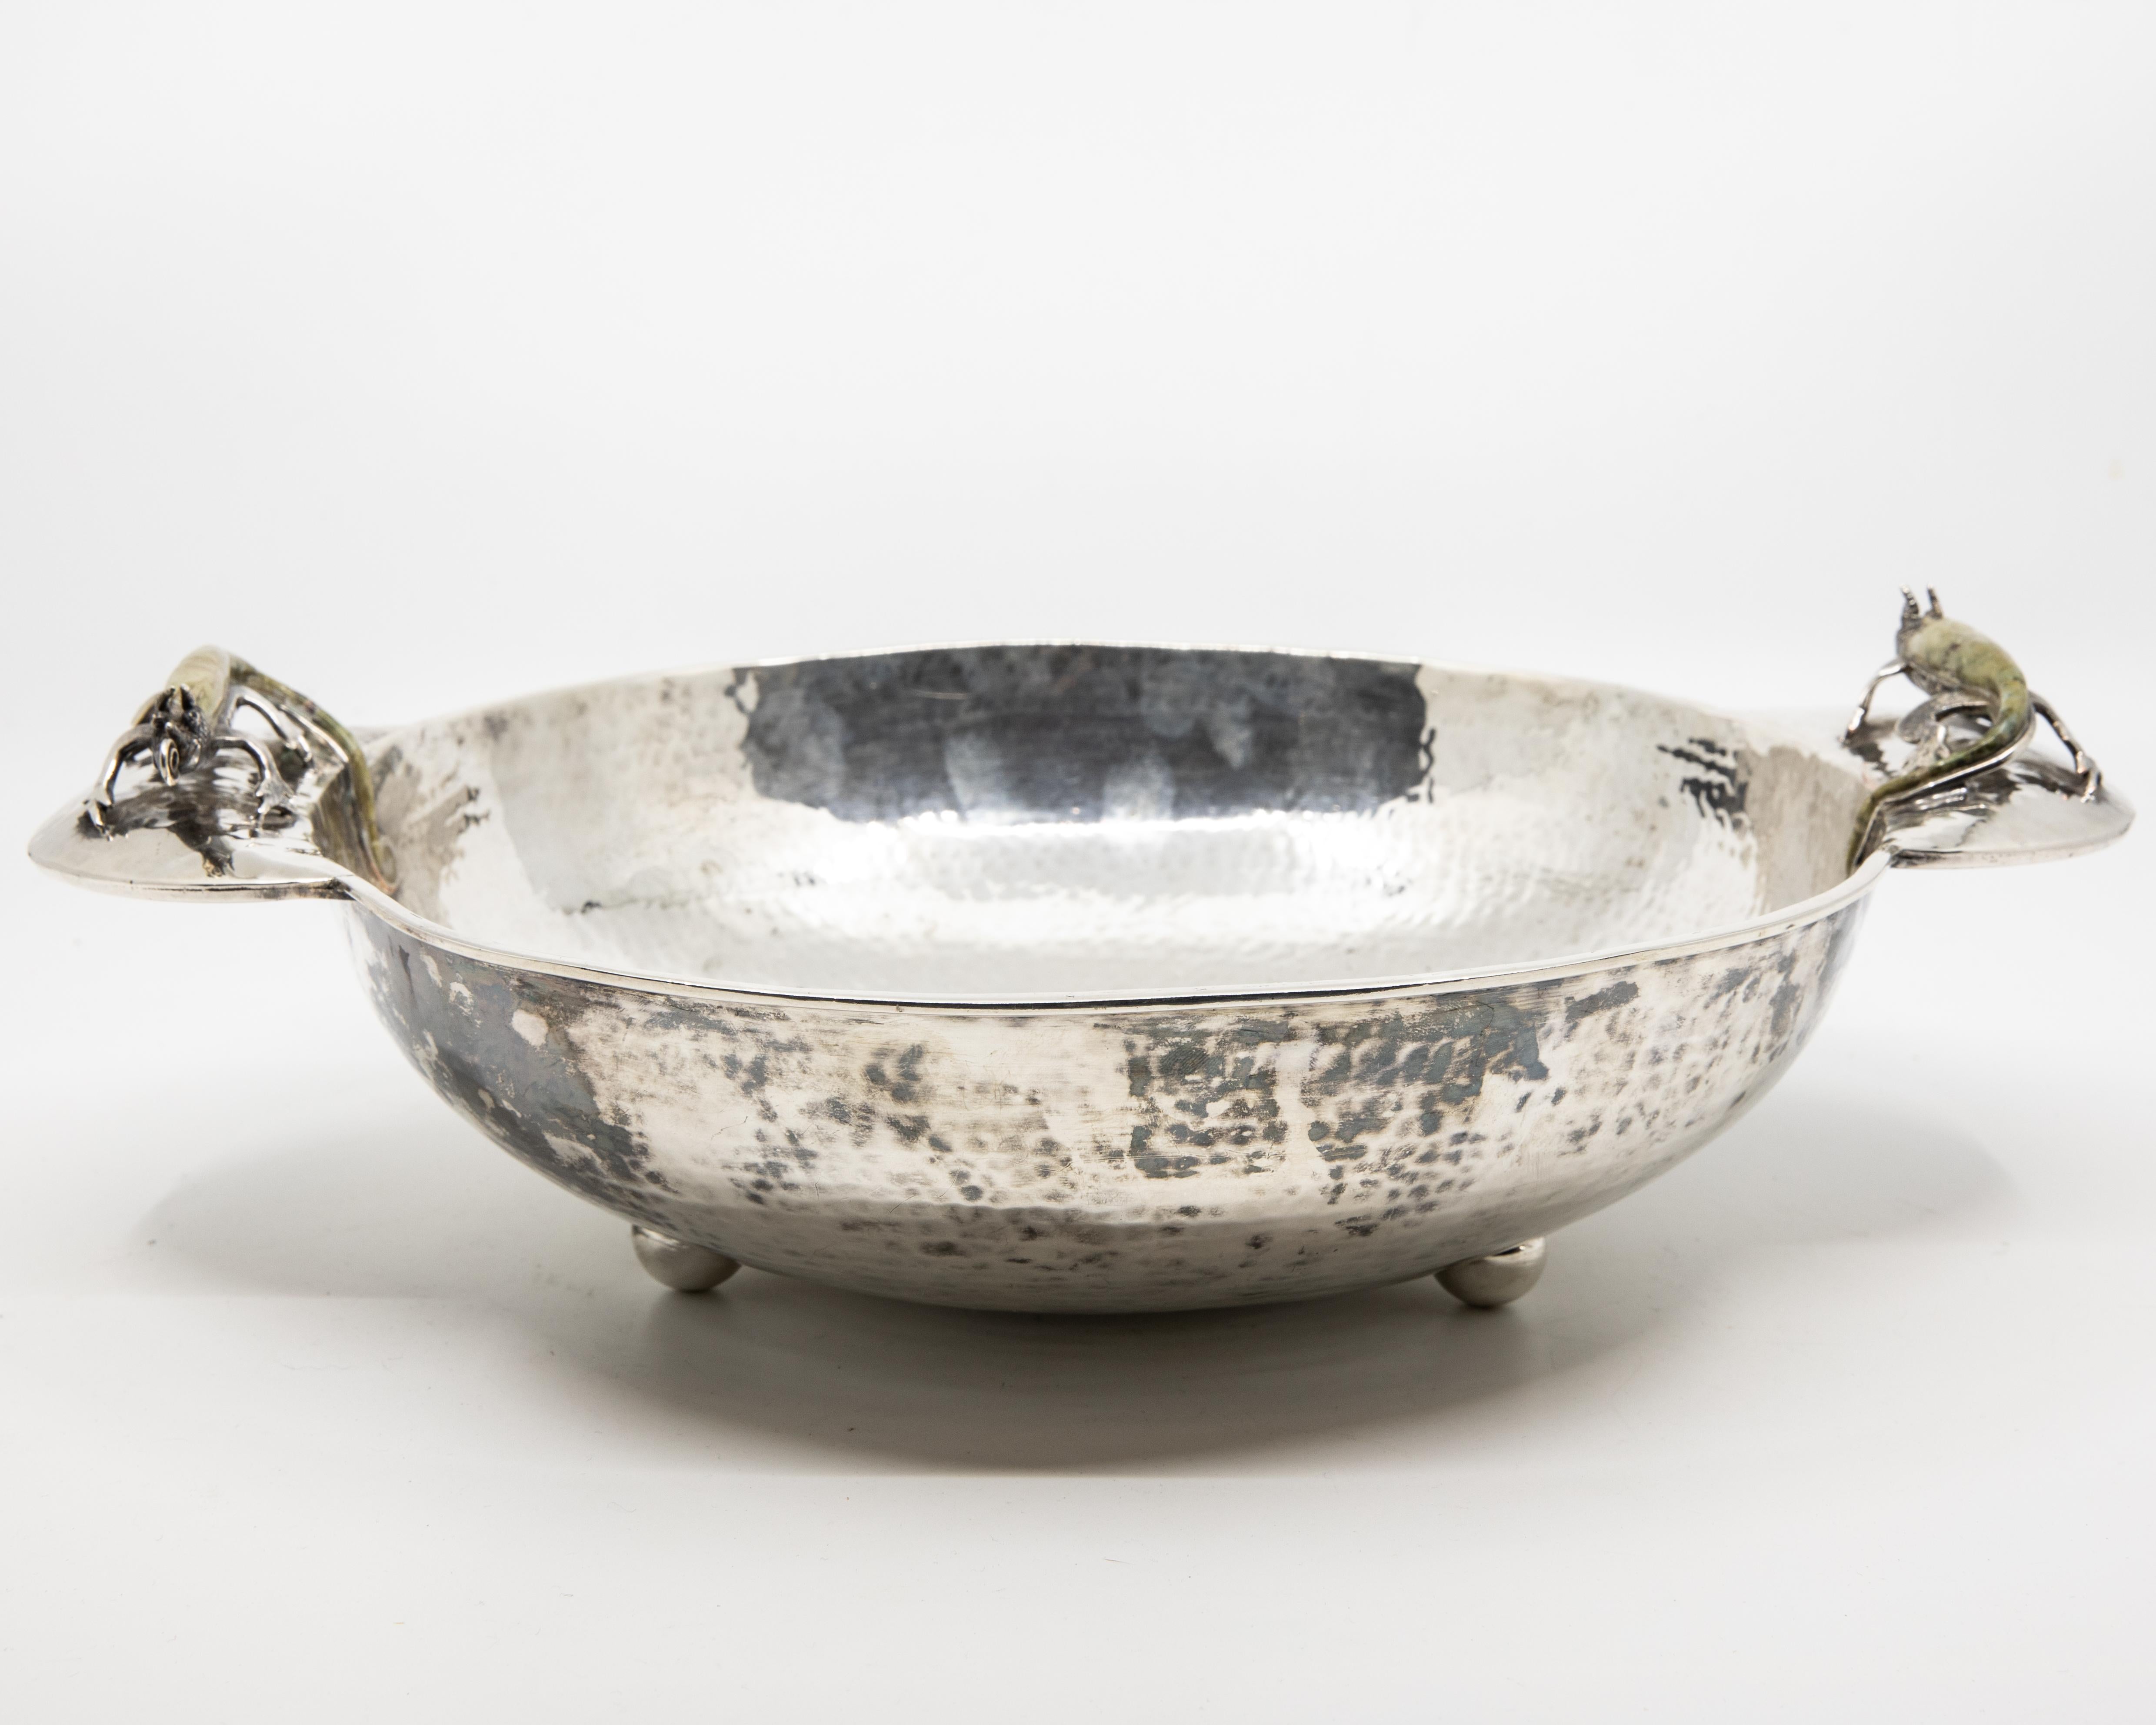 Offered is a Wolmar Castillo circa 1960s hand-hammered Taxco silver plated copper. The bowl has Iguana handles that are set with green stones. Marking on bottom reads 